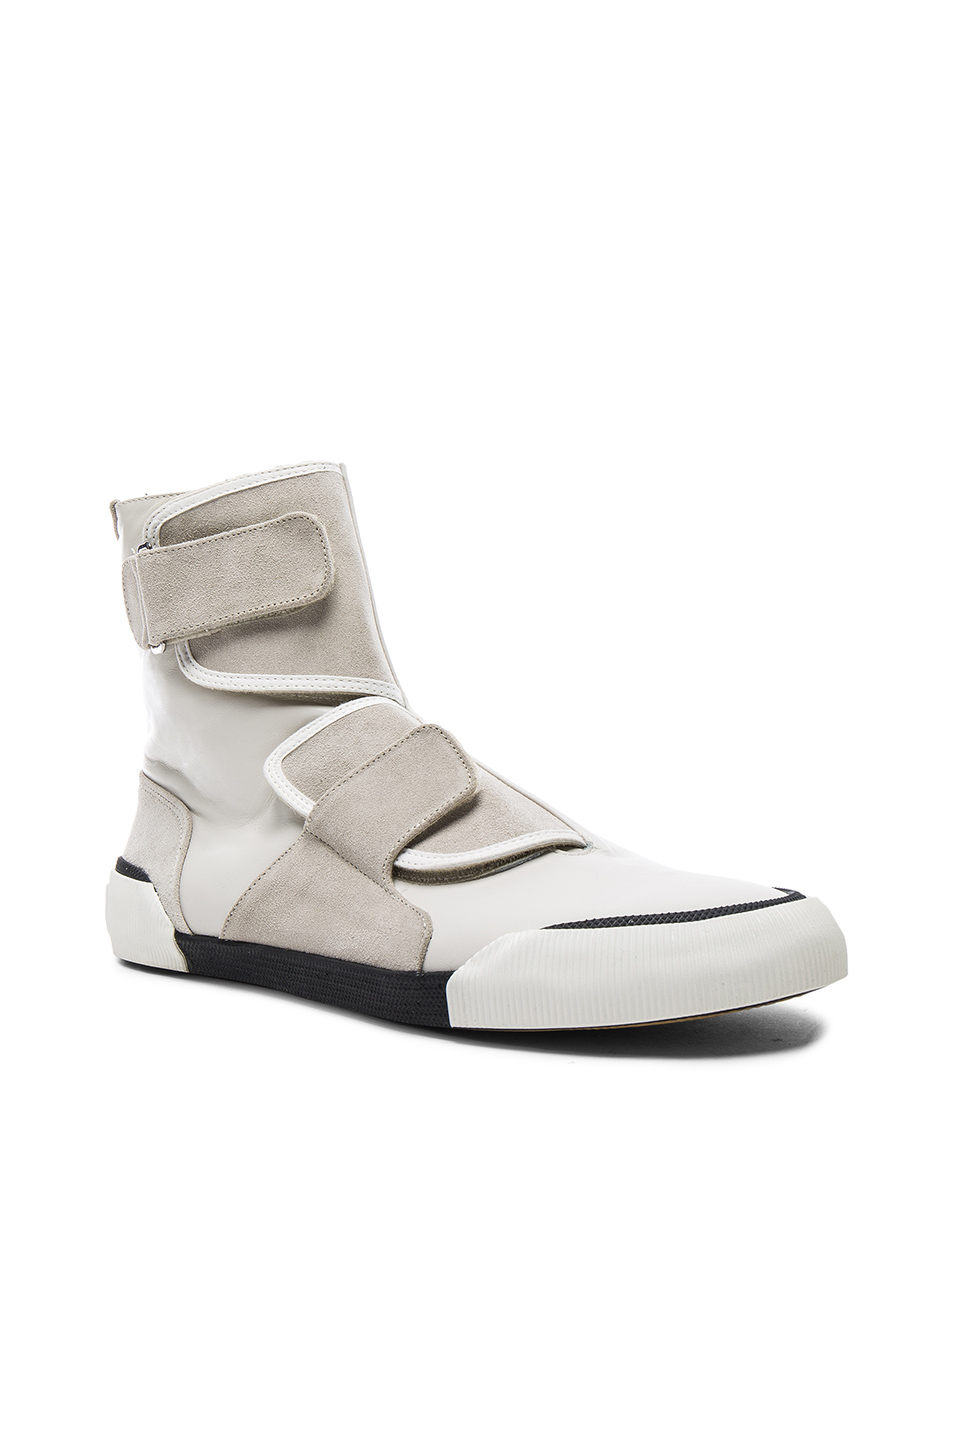 Lanvin Leather-suede Strappy High-top Sneaker, Light Gray In Pale Grey ...